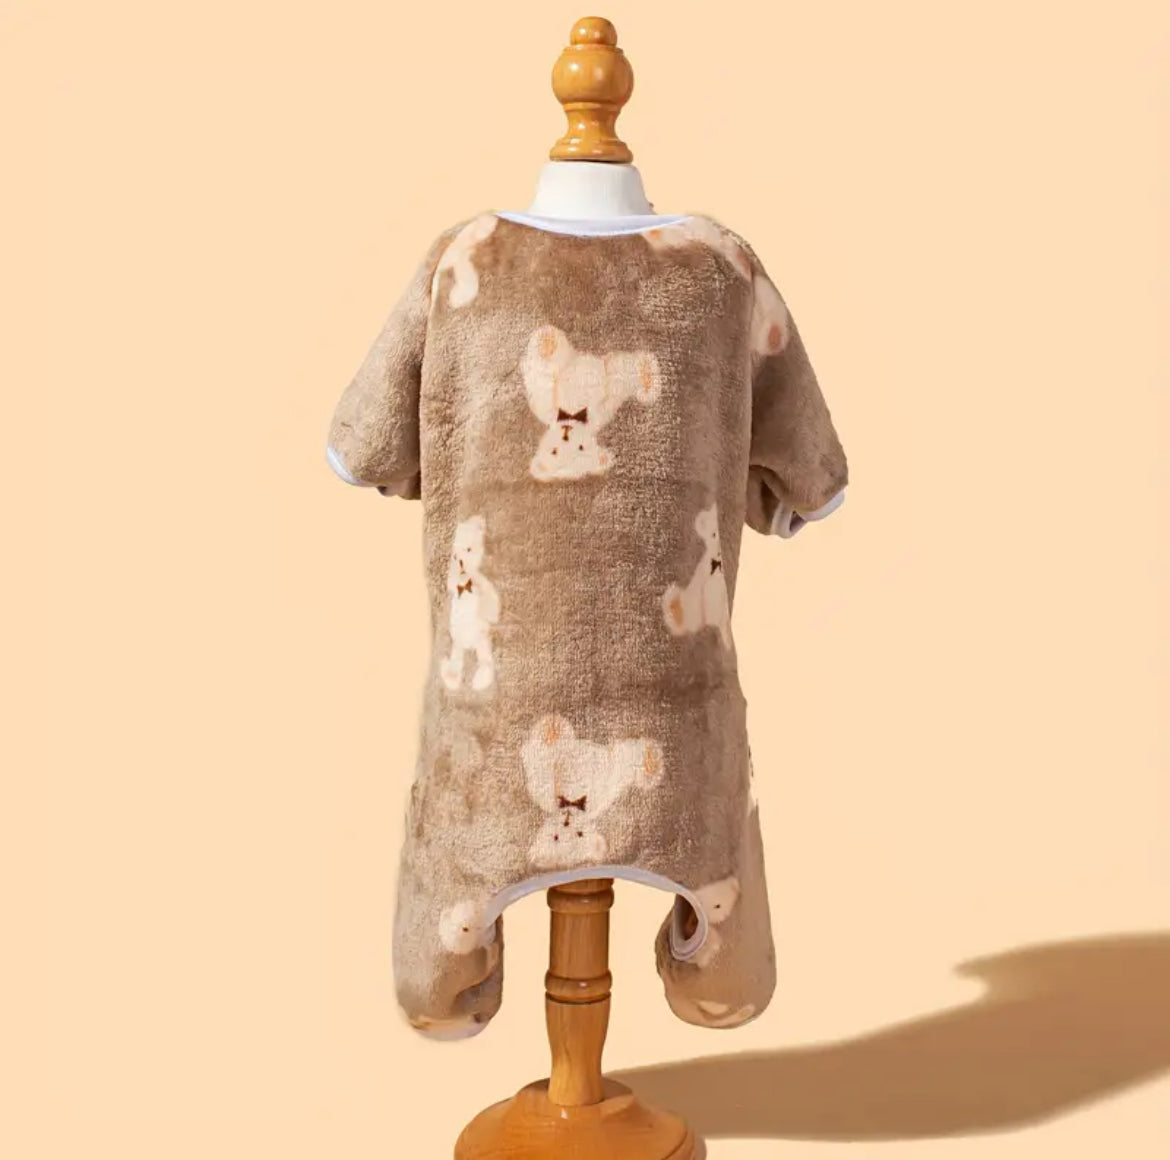 Soft And Cozy Modish Bear Onesie For Small And Medium Dogs And Cats - Perfect Pet Clothes For Comfort And Style